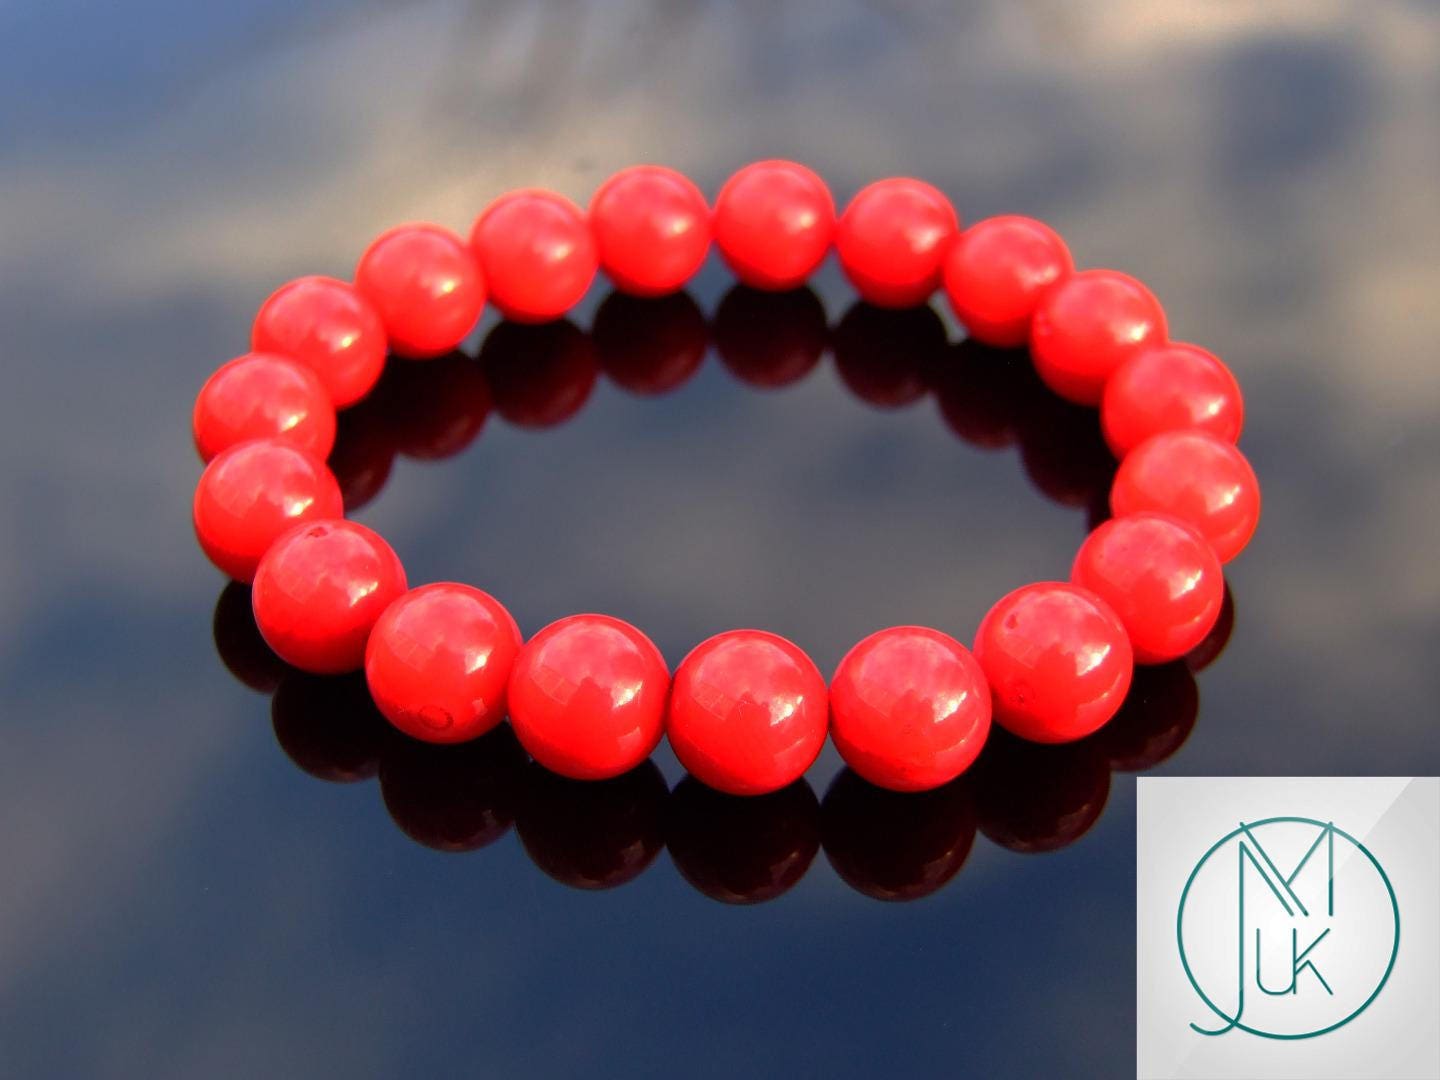 Discover more than 79 red coral stone bracelet best